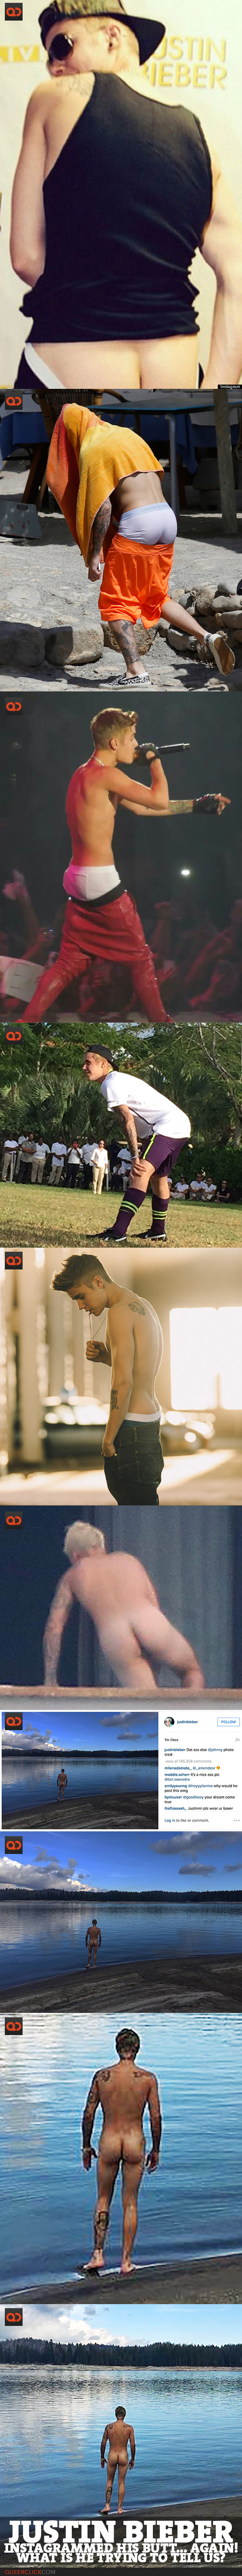 qc-celebs-justin-bieber-butt-on-instagram_again-collage02